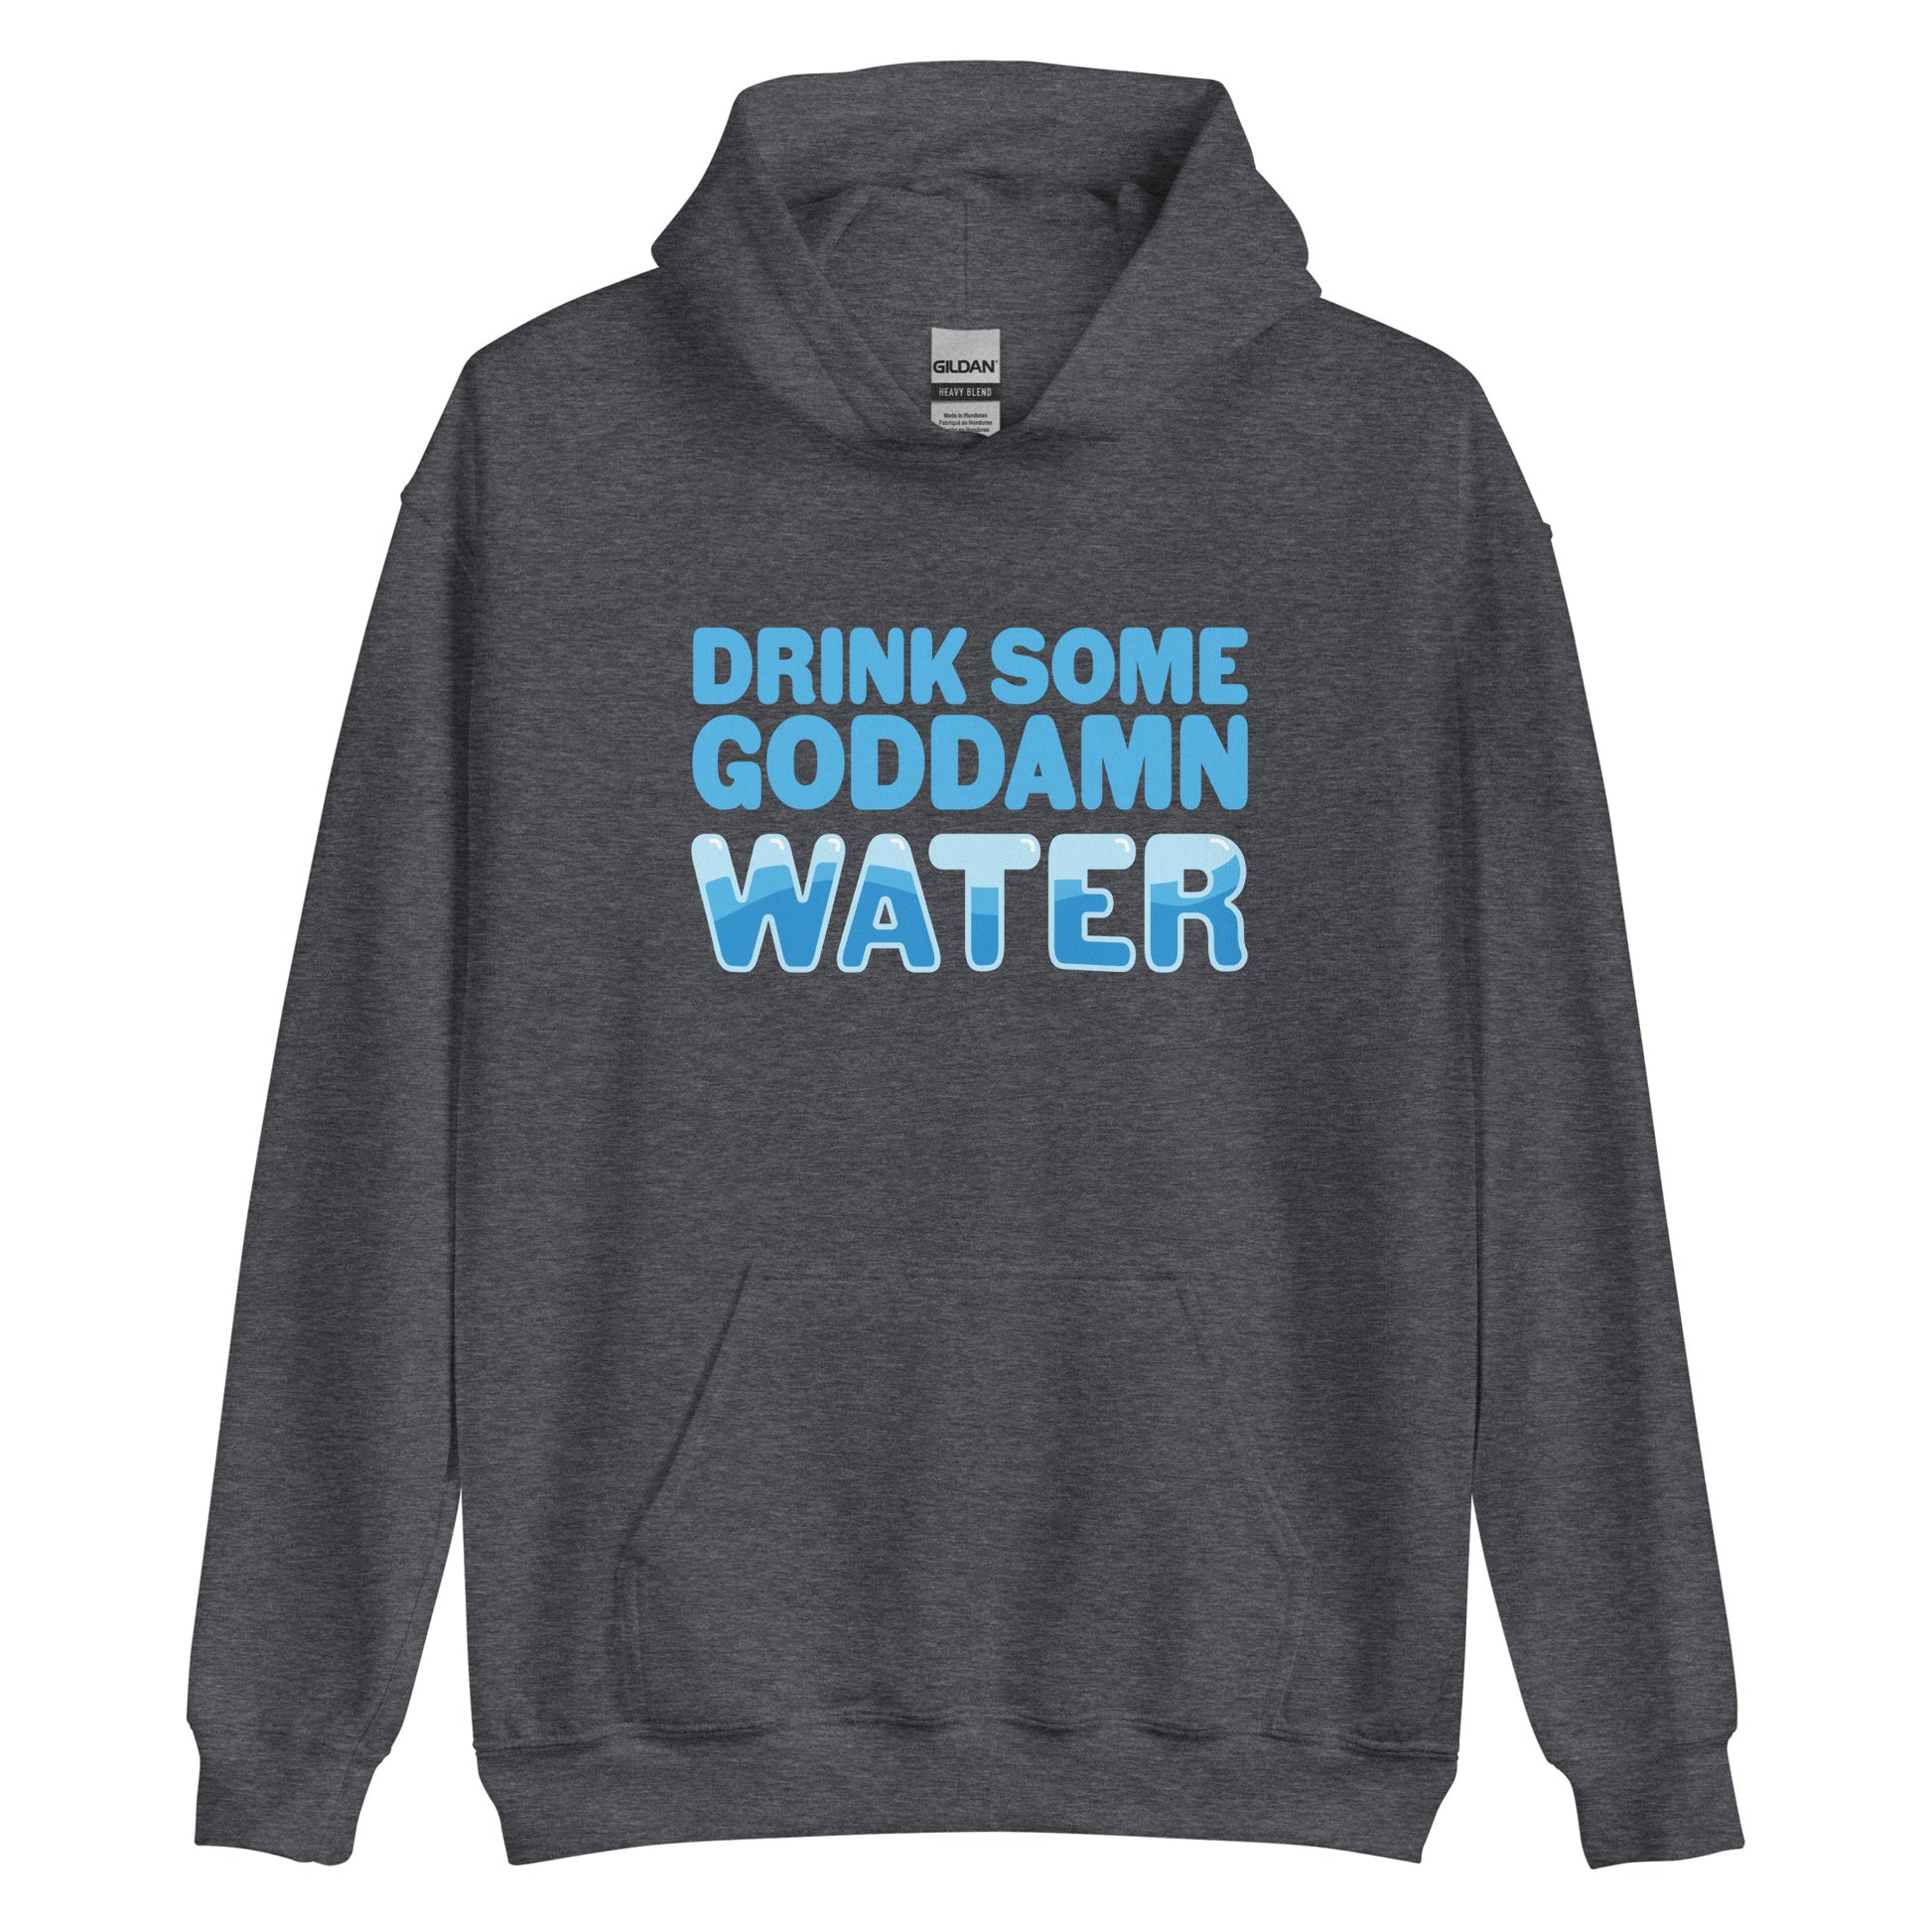 A dark gray hooded sweatshirt with bold blue text reading "Drink some goddamn water"